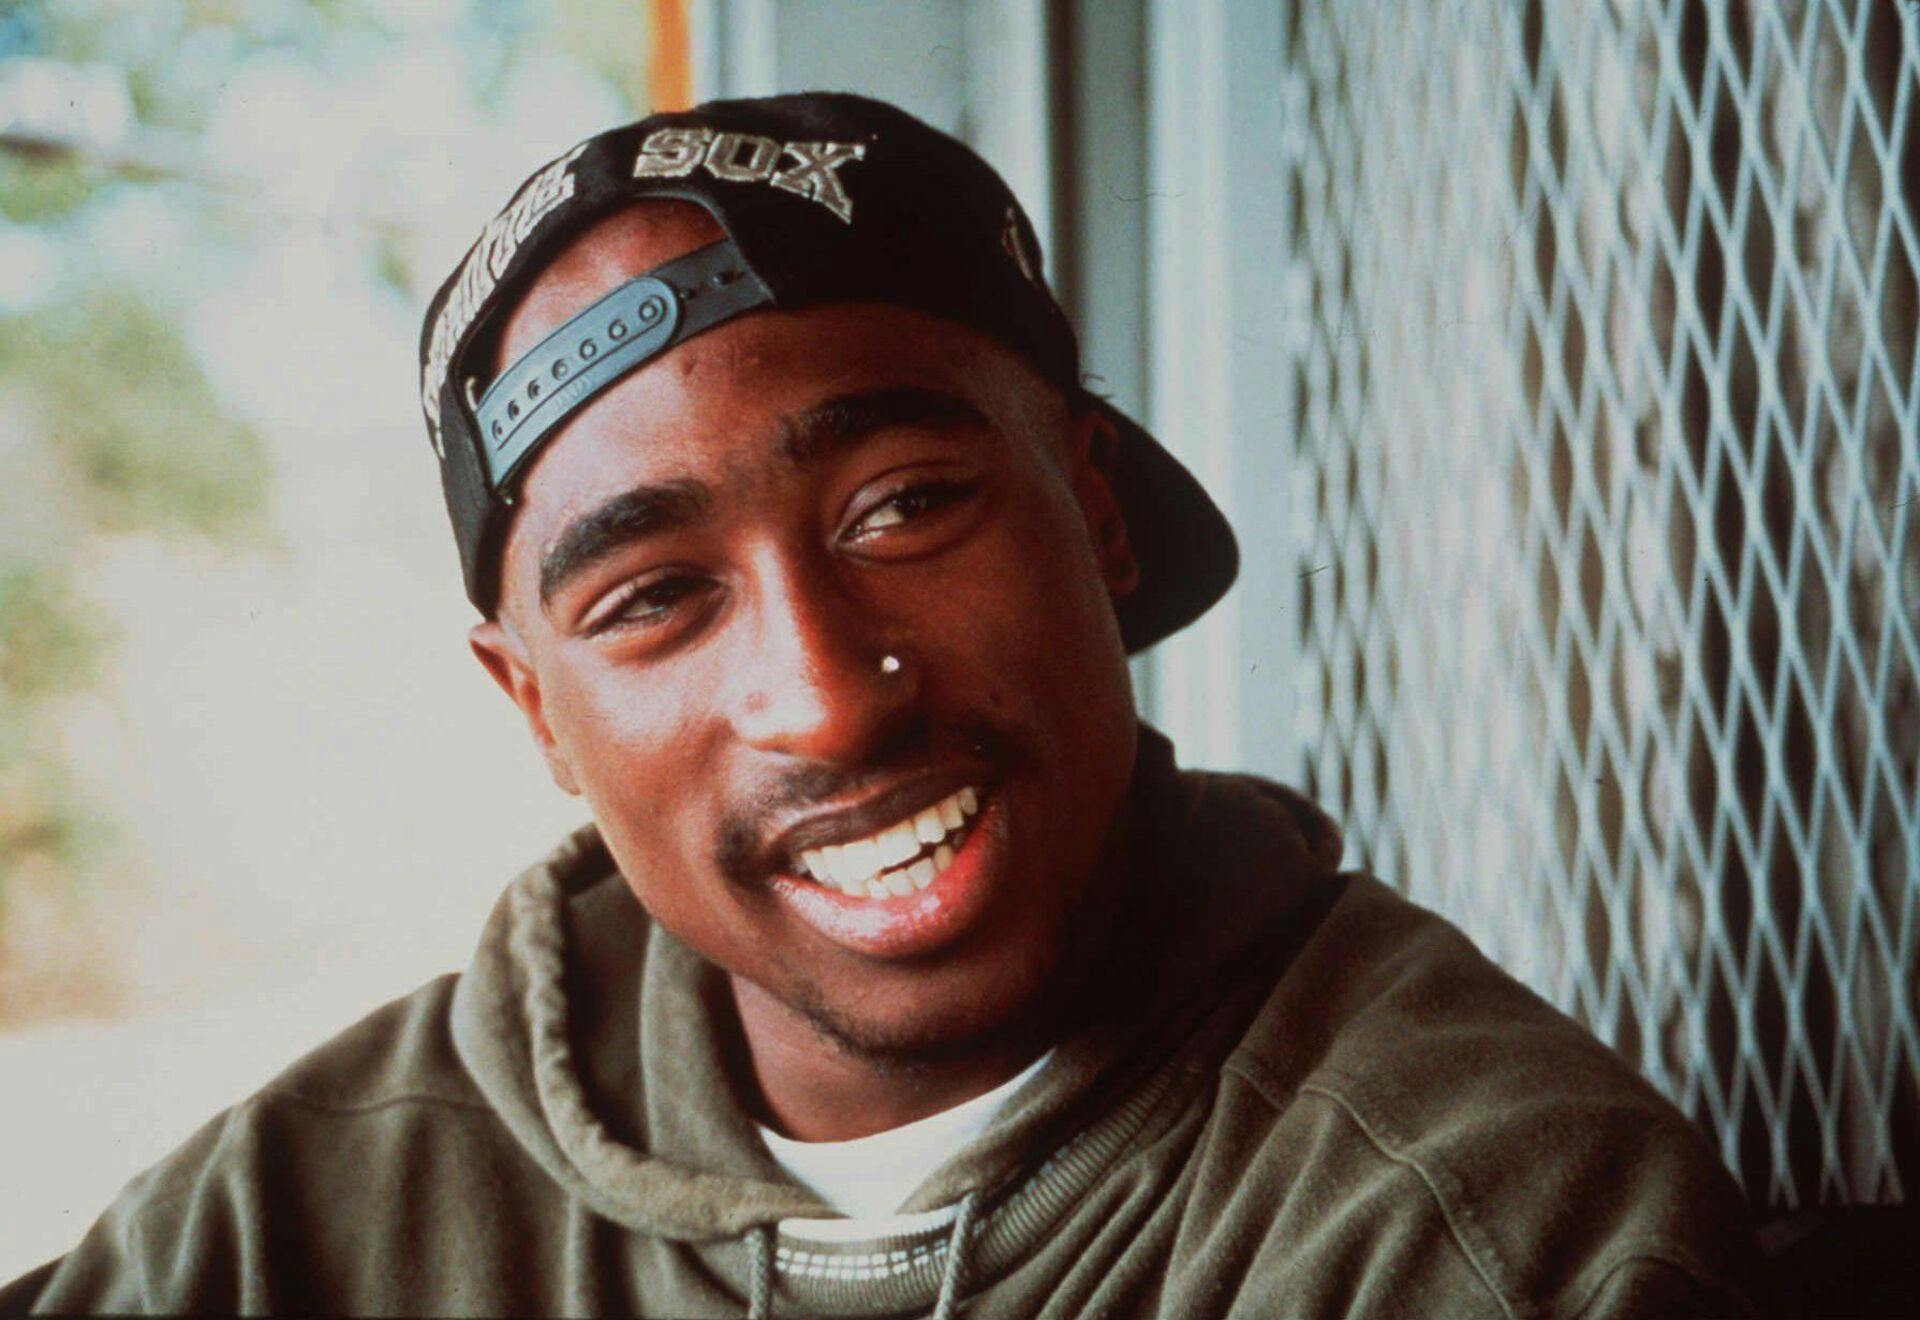 ** FILE **Rap musician Tupac Shakur shown in this 1993 file photo. Shakur died on Sept. 13, 1996, the victim of a drive-by shooting. (AP Photo/FILE)